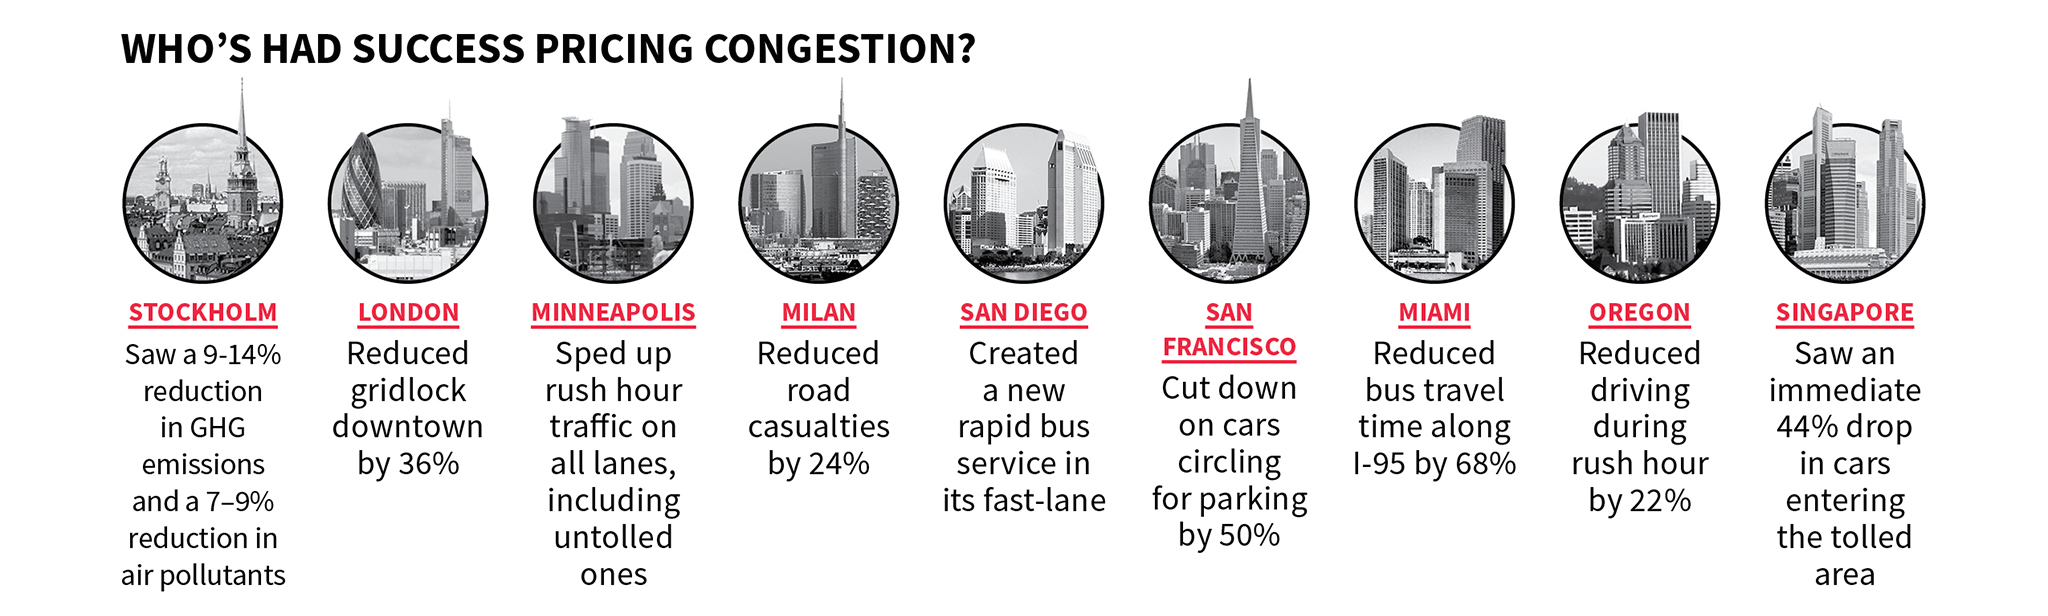 Who's had success pricing congestion?